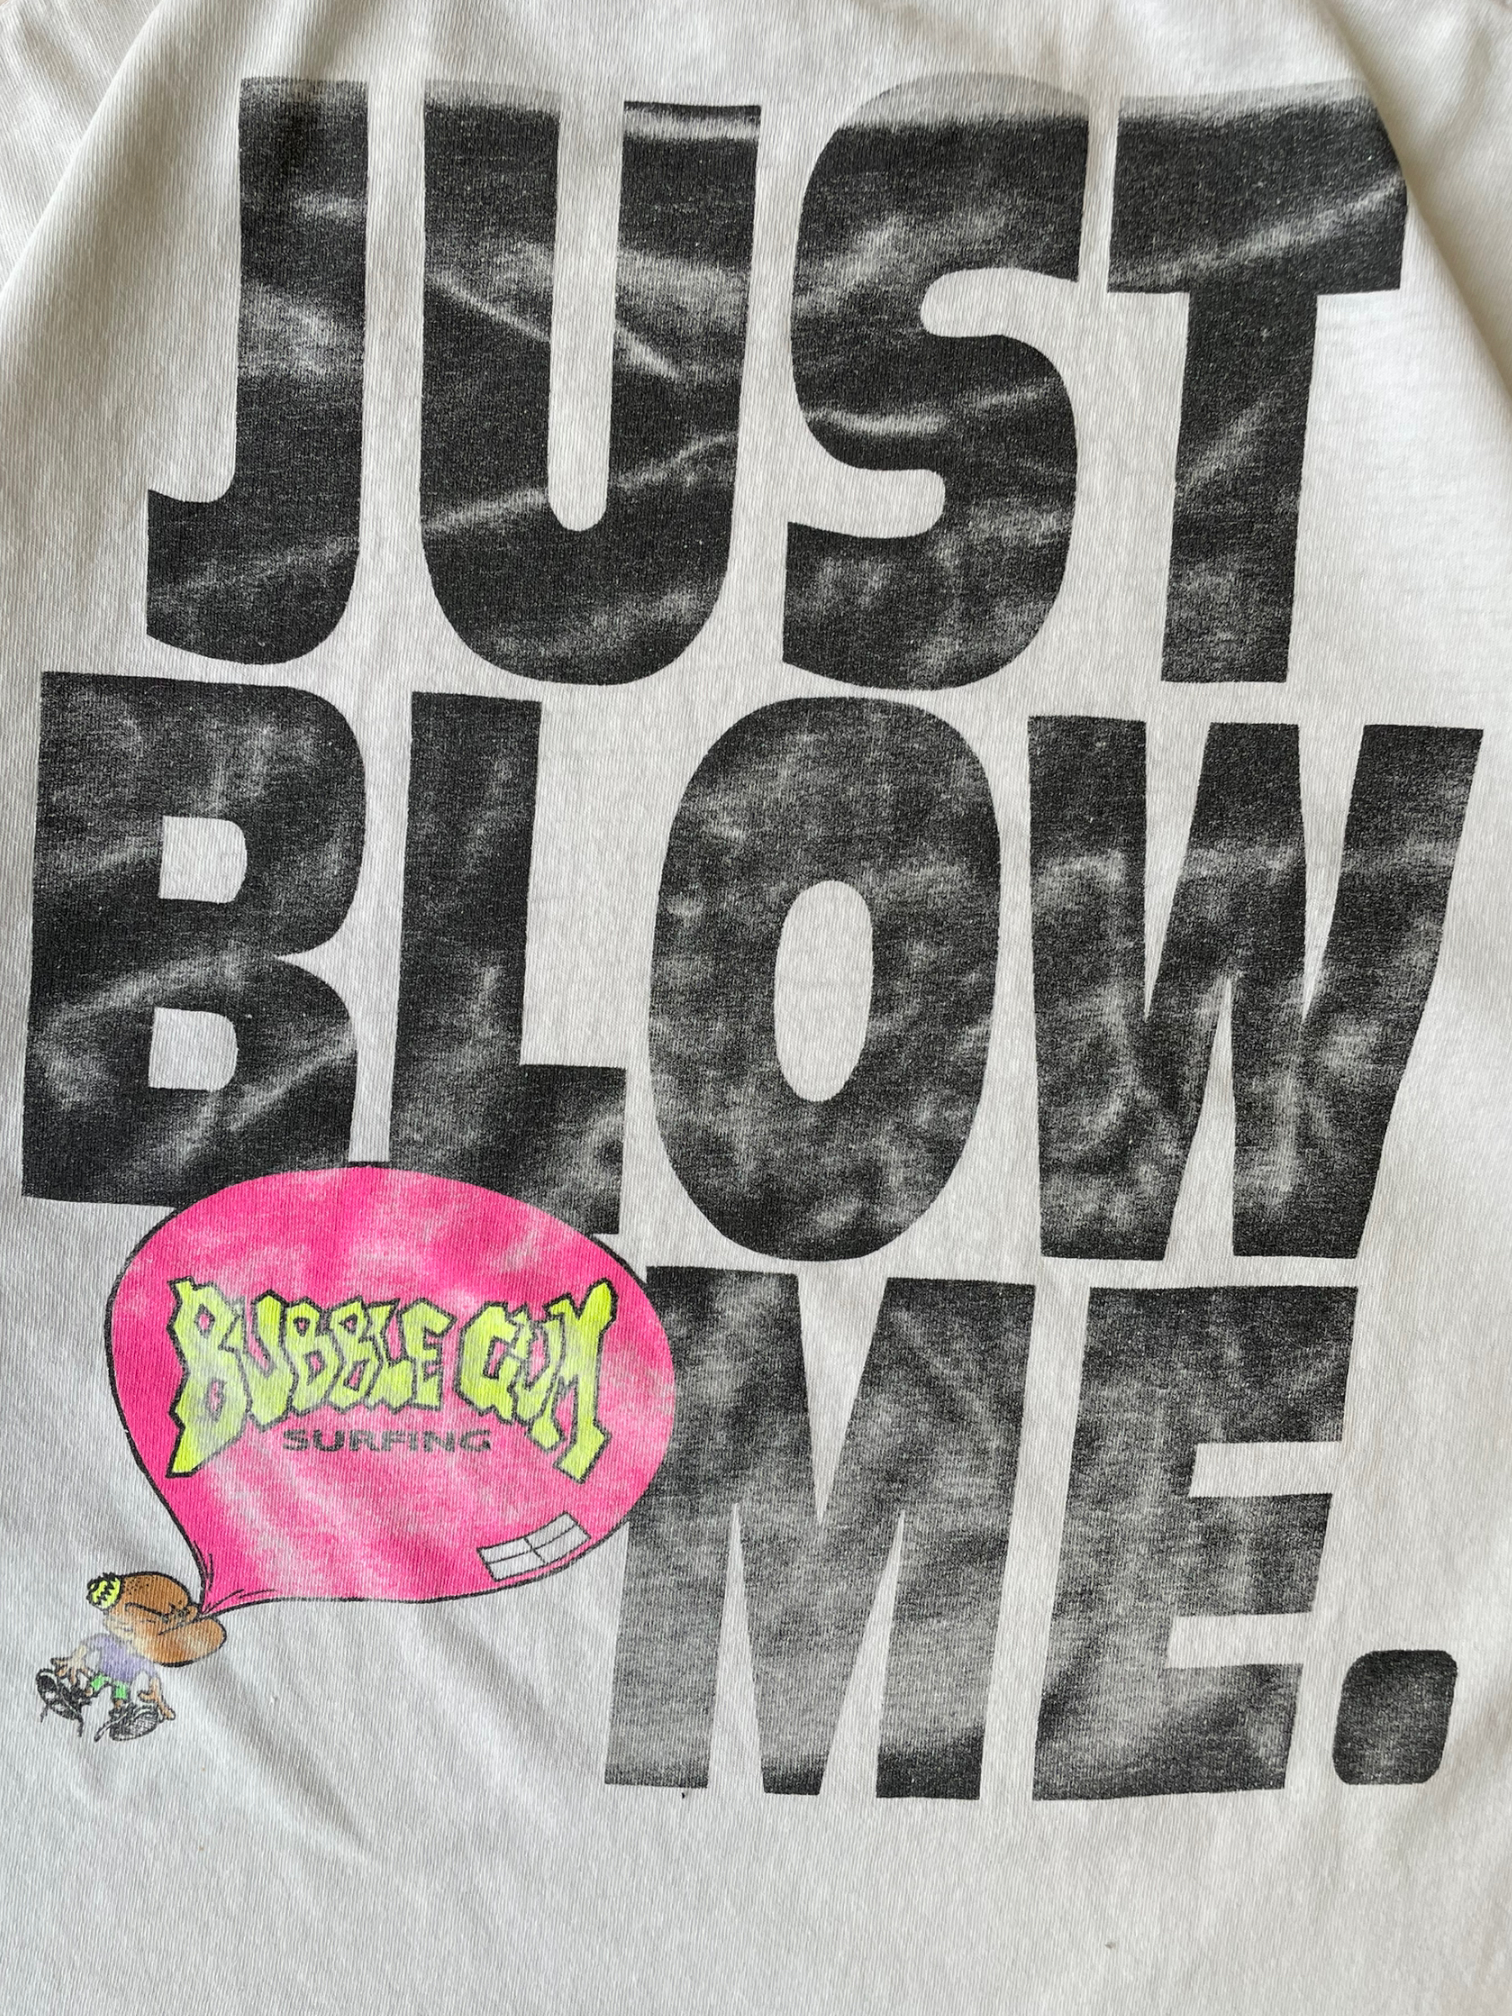 90s Just Blow Me Surf Wax T-Shirt - X-Large